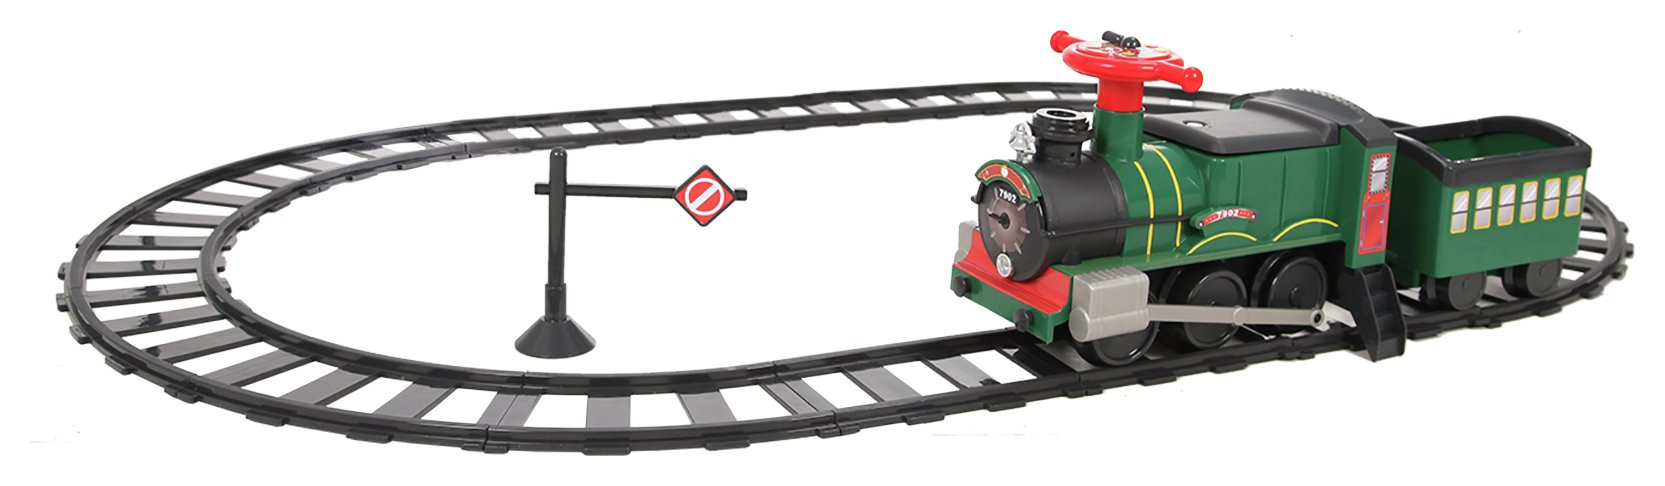 rideable toy train